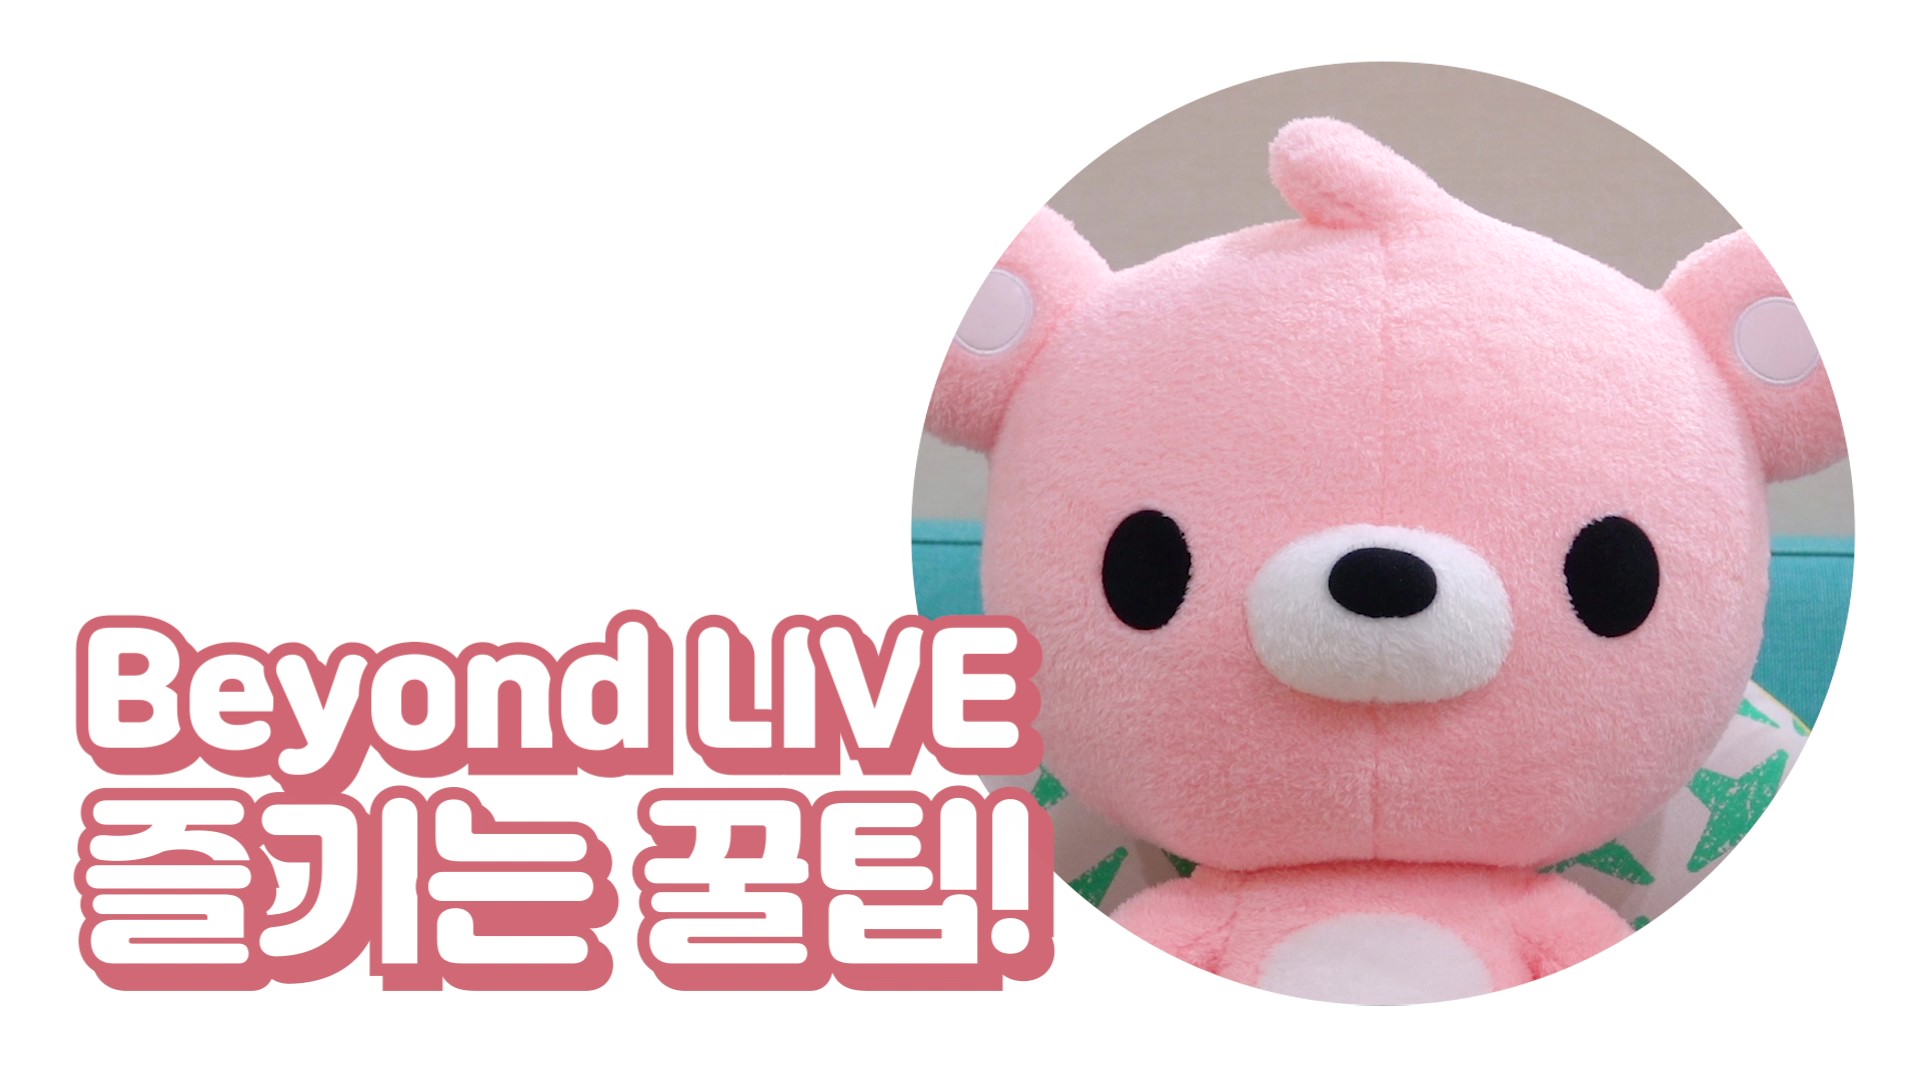 Beyond LIVE 즐기는 꿀팁! SPECIAL tips to enjoy Beyond LIVE! (feat. #NCT127)